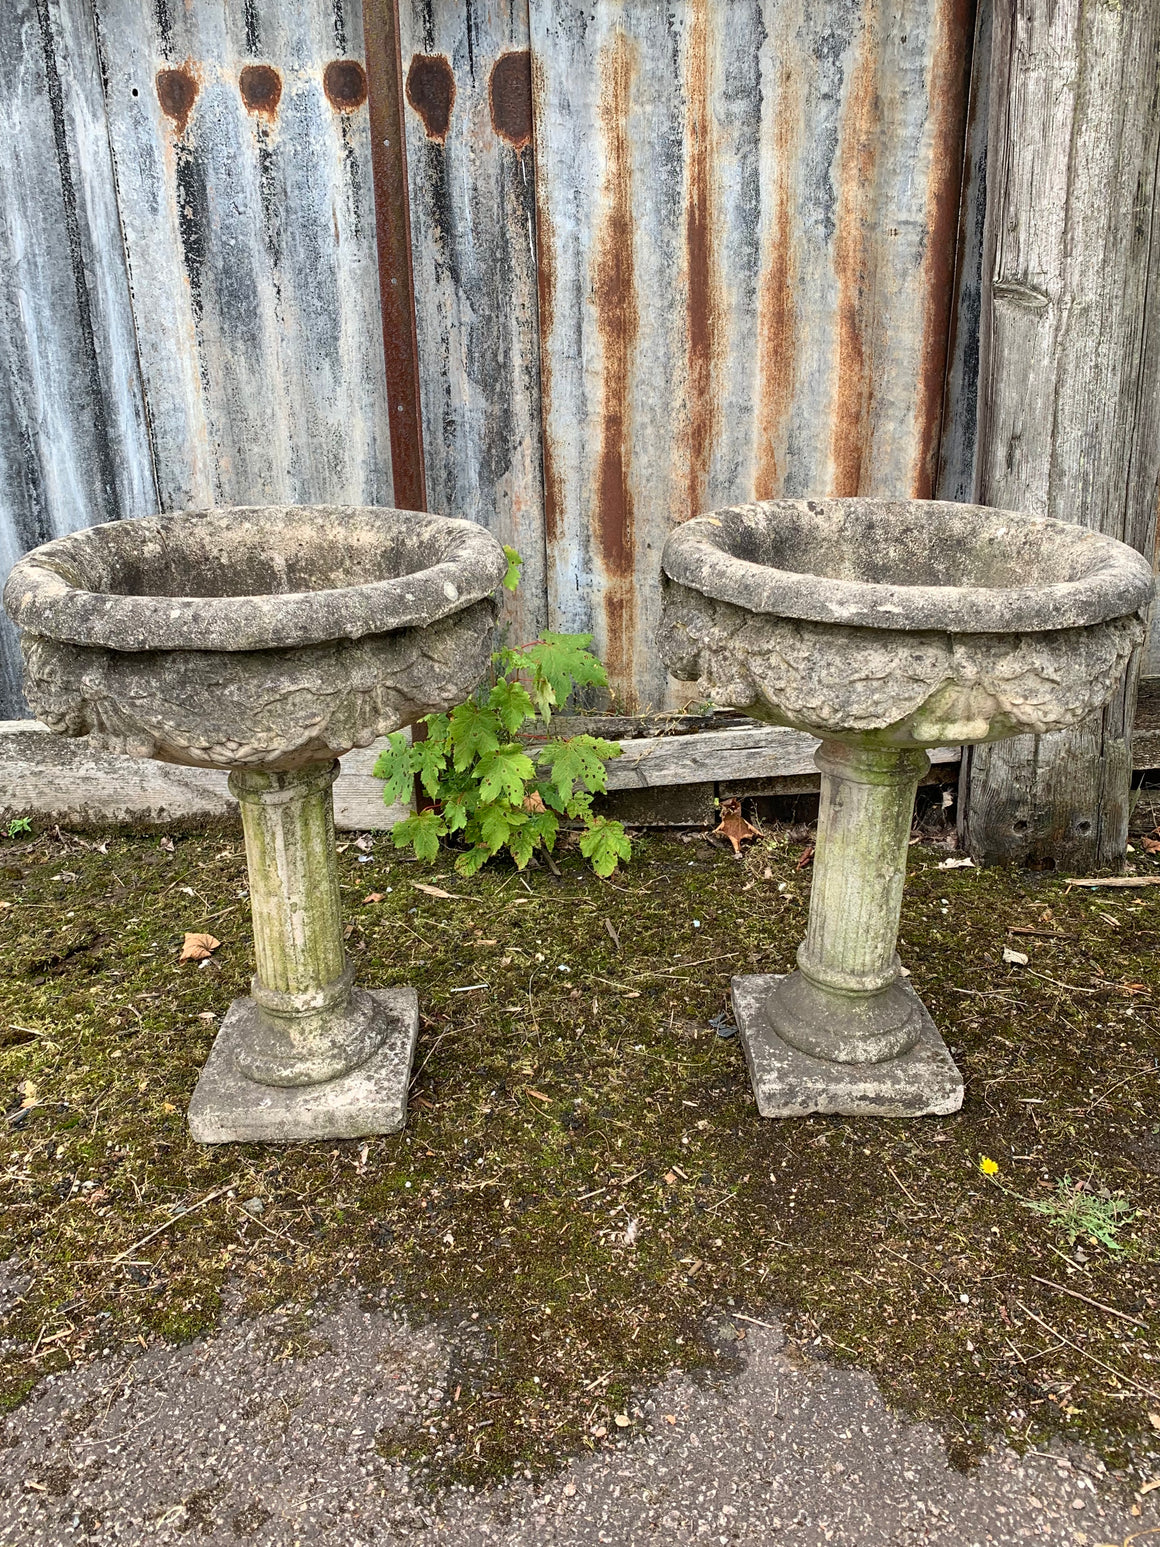 A pair of large stone classical urns